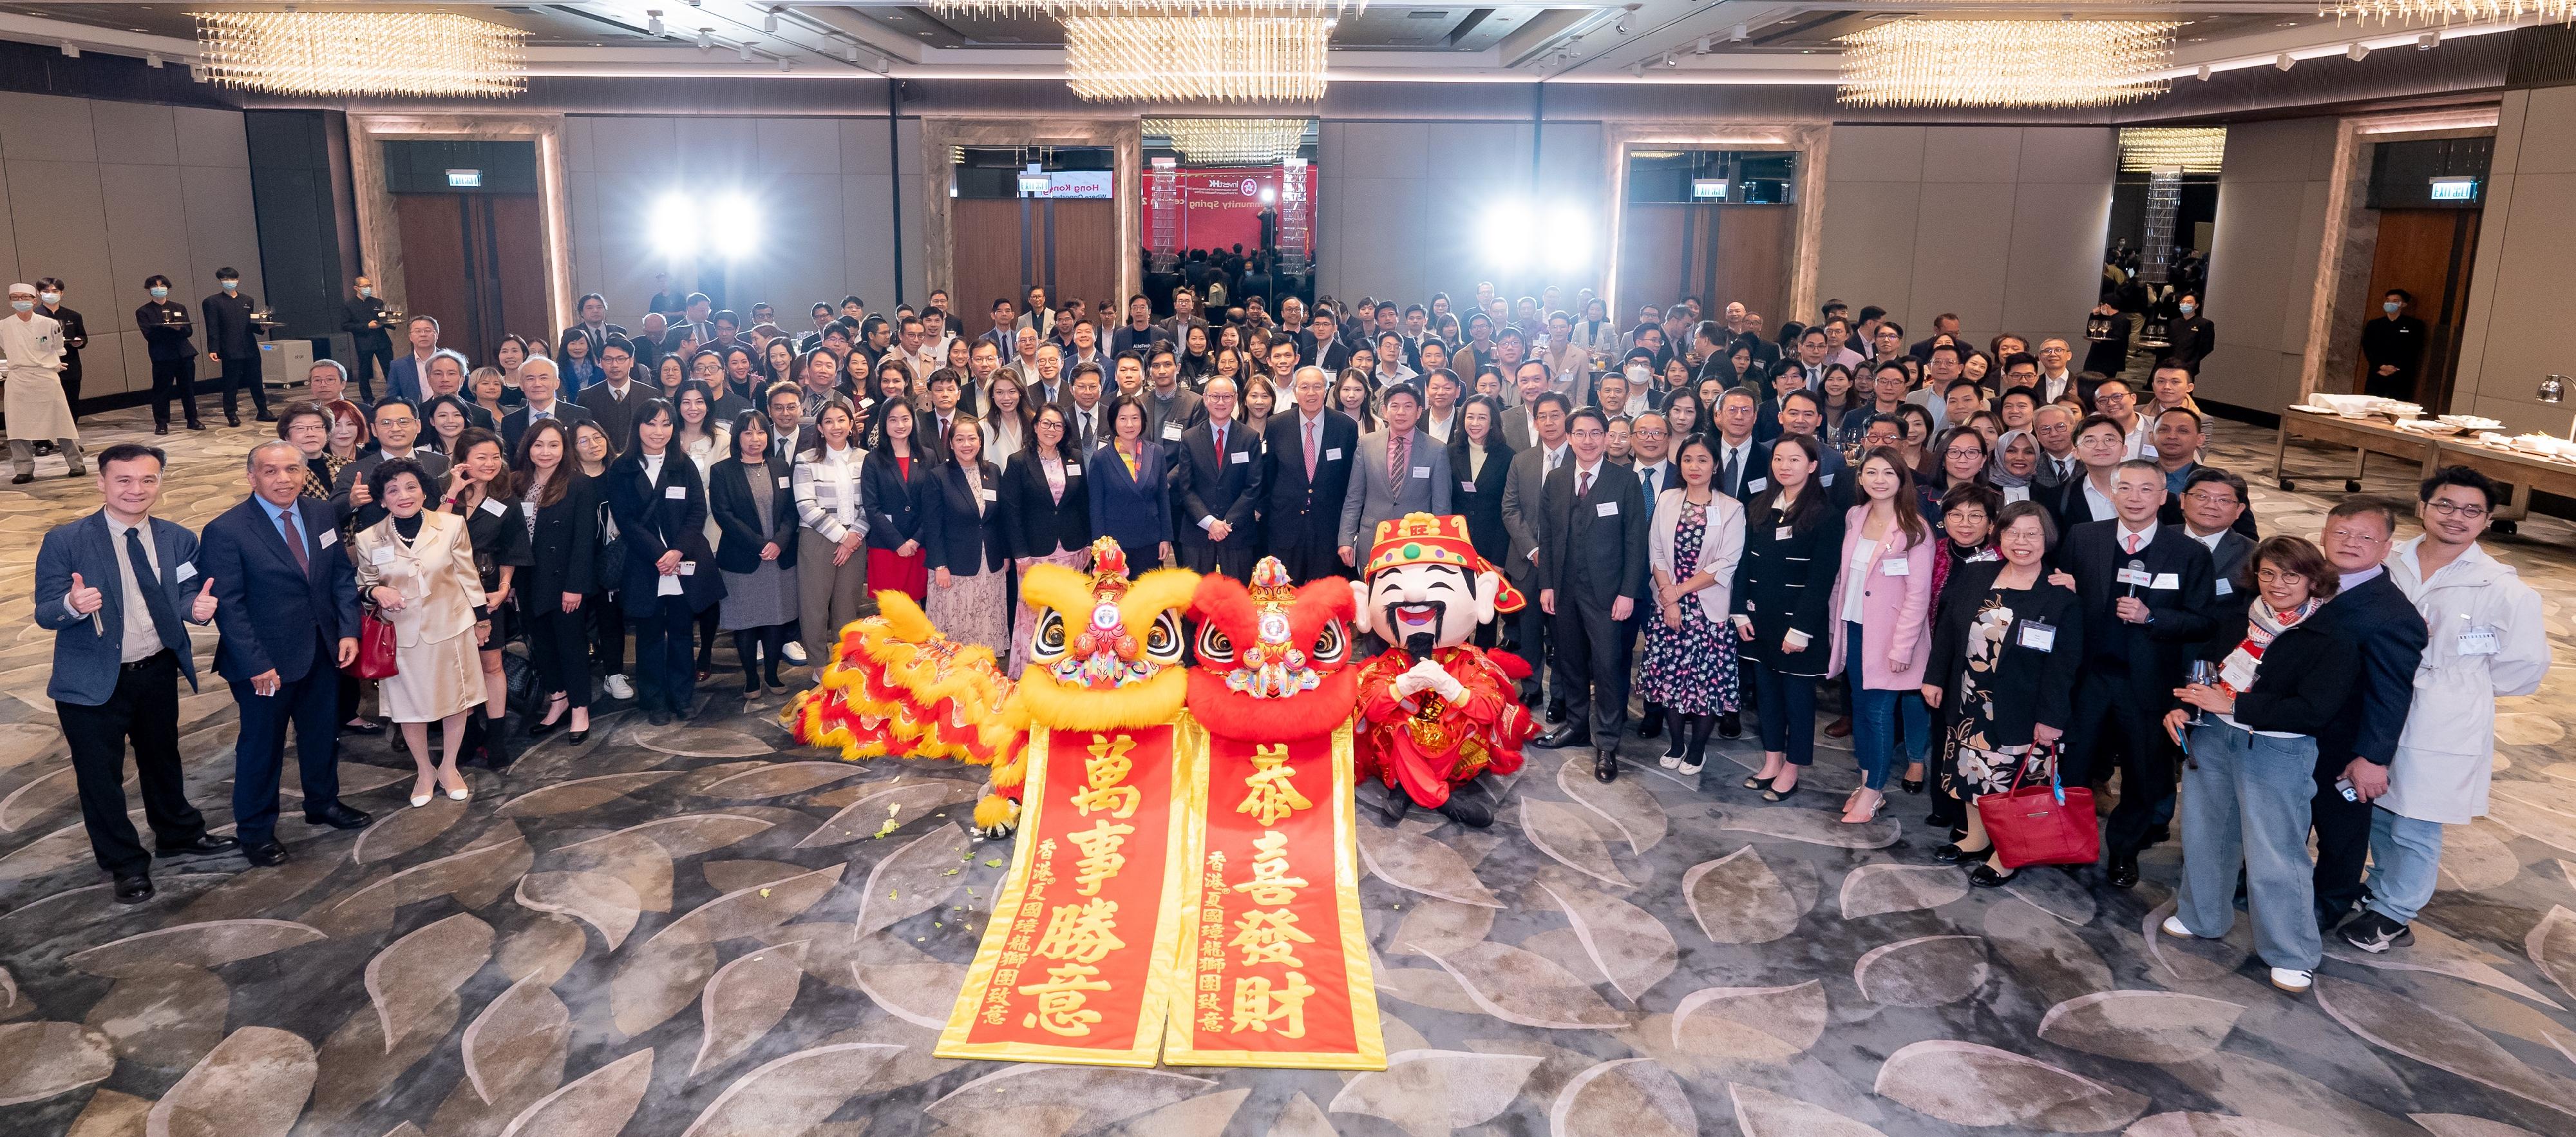 Invest Hong Kong today (February 29) organised a spring reception to thank the Association of Southeast Asian Nations business community for their support. Photo shows the participants at the event.